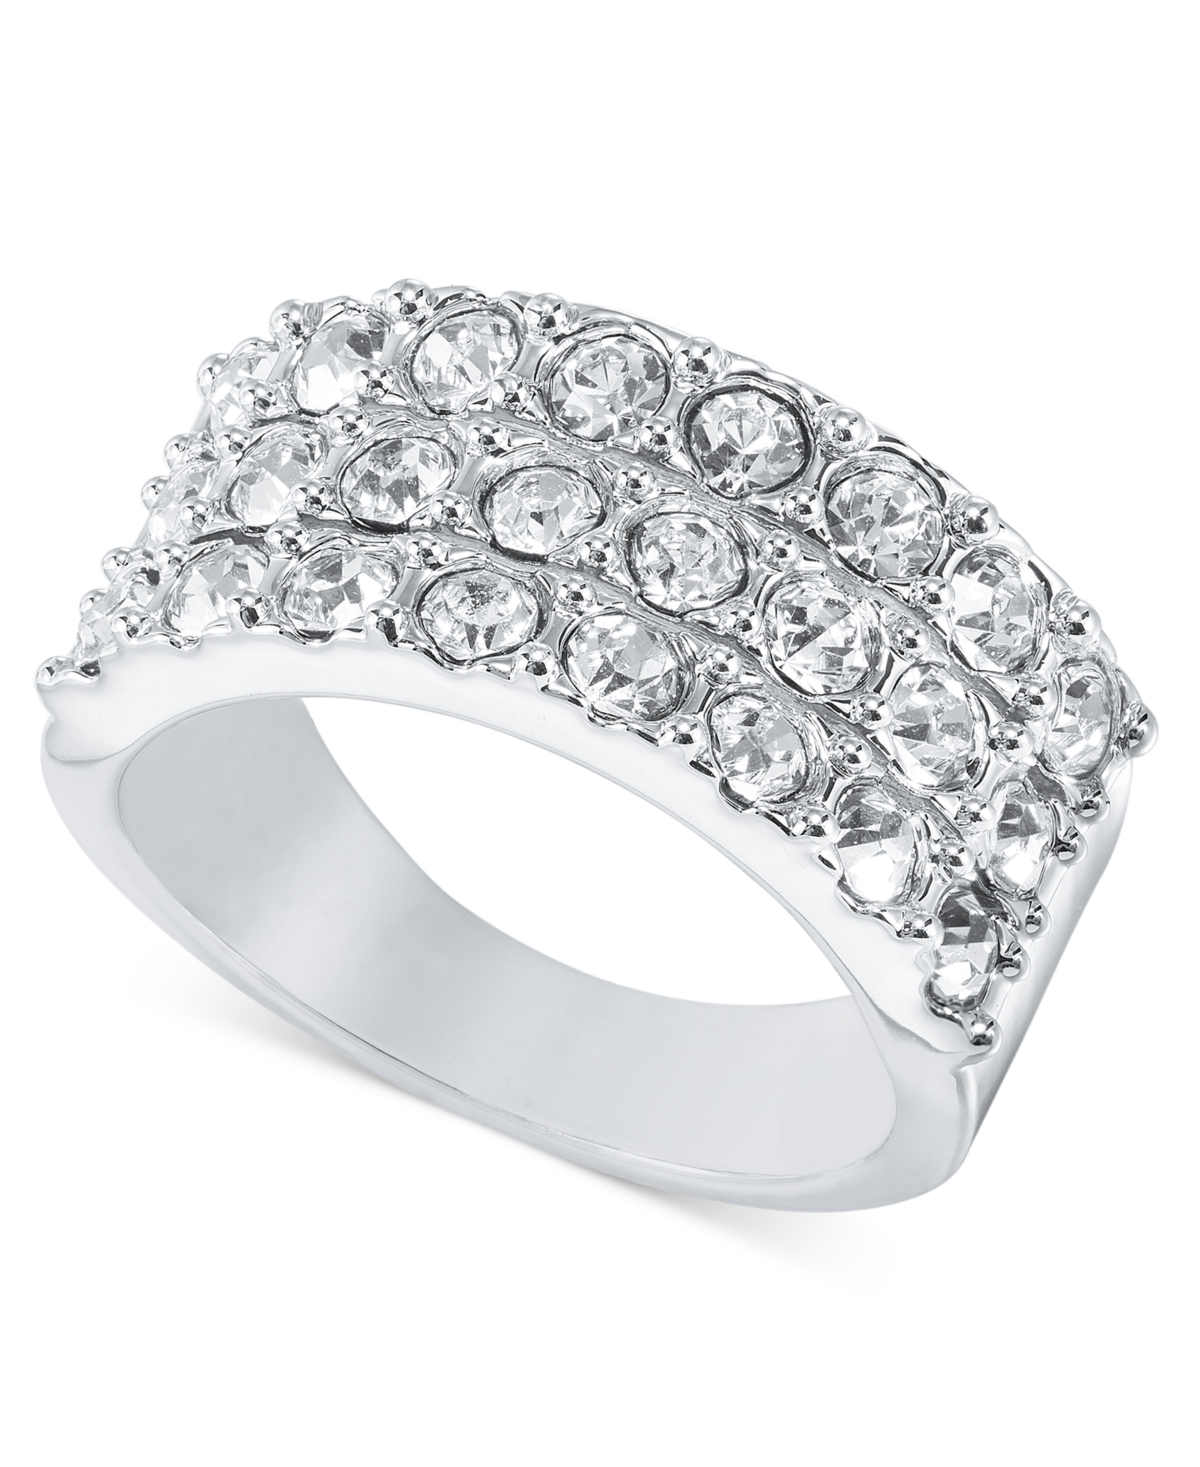 Pave Triple-Row Ring, Created for Macy's - Silver